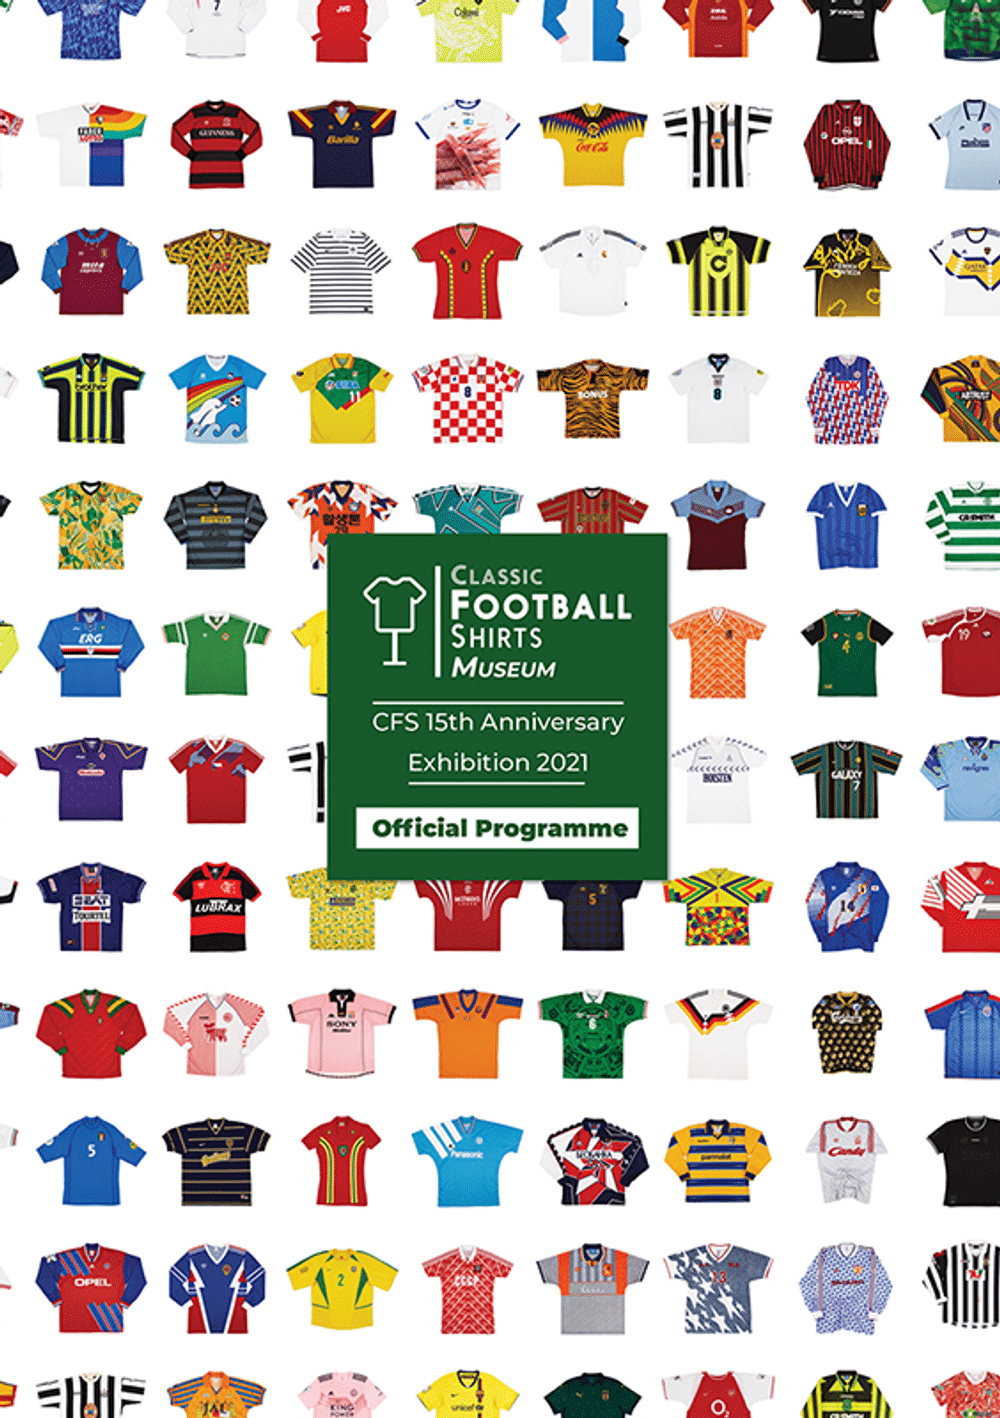 2021 Classic Football Shirts Museum 15th Anniversary Exhibition Programme